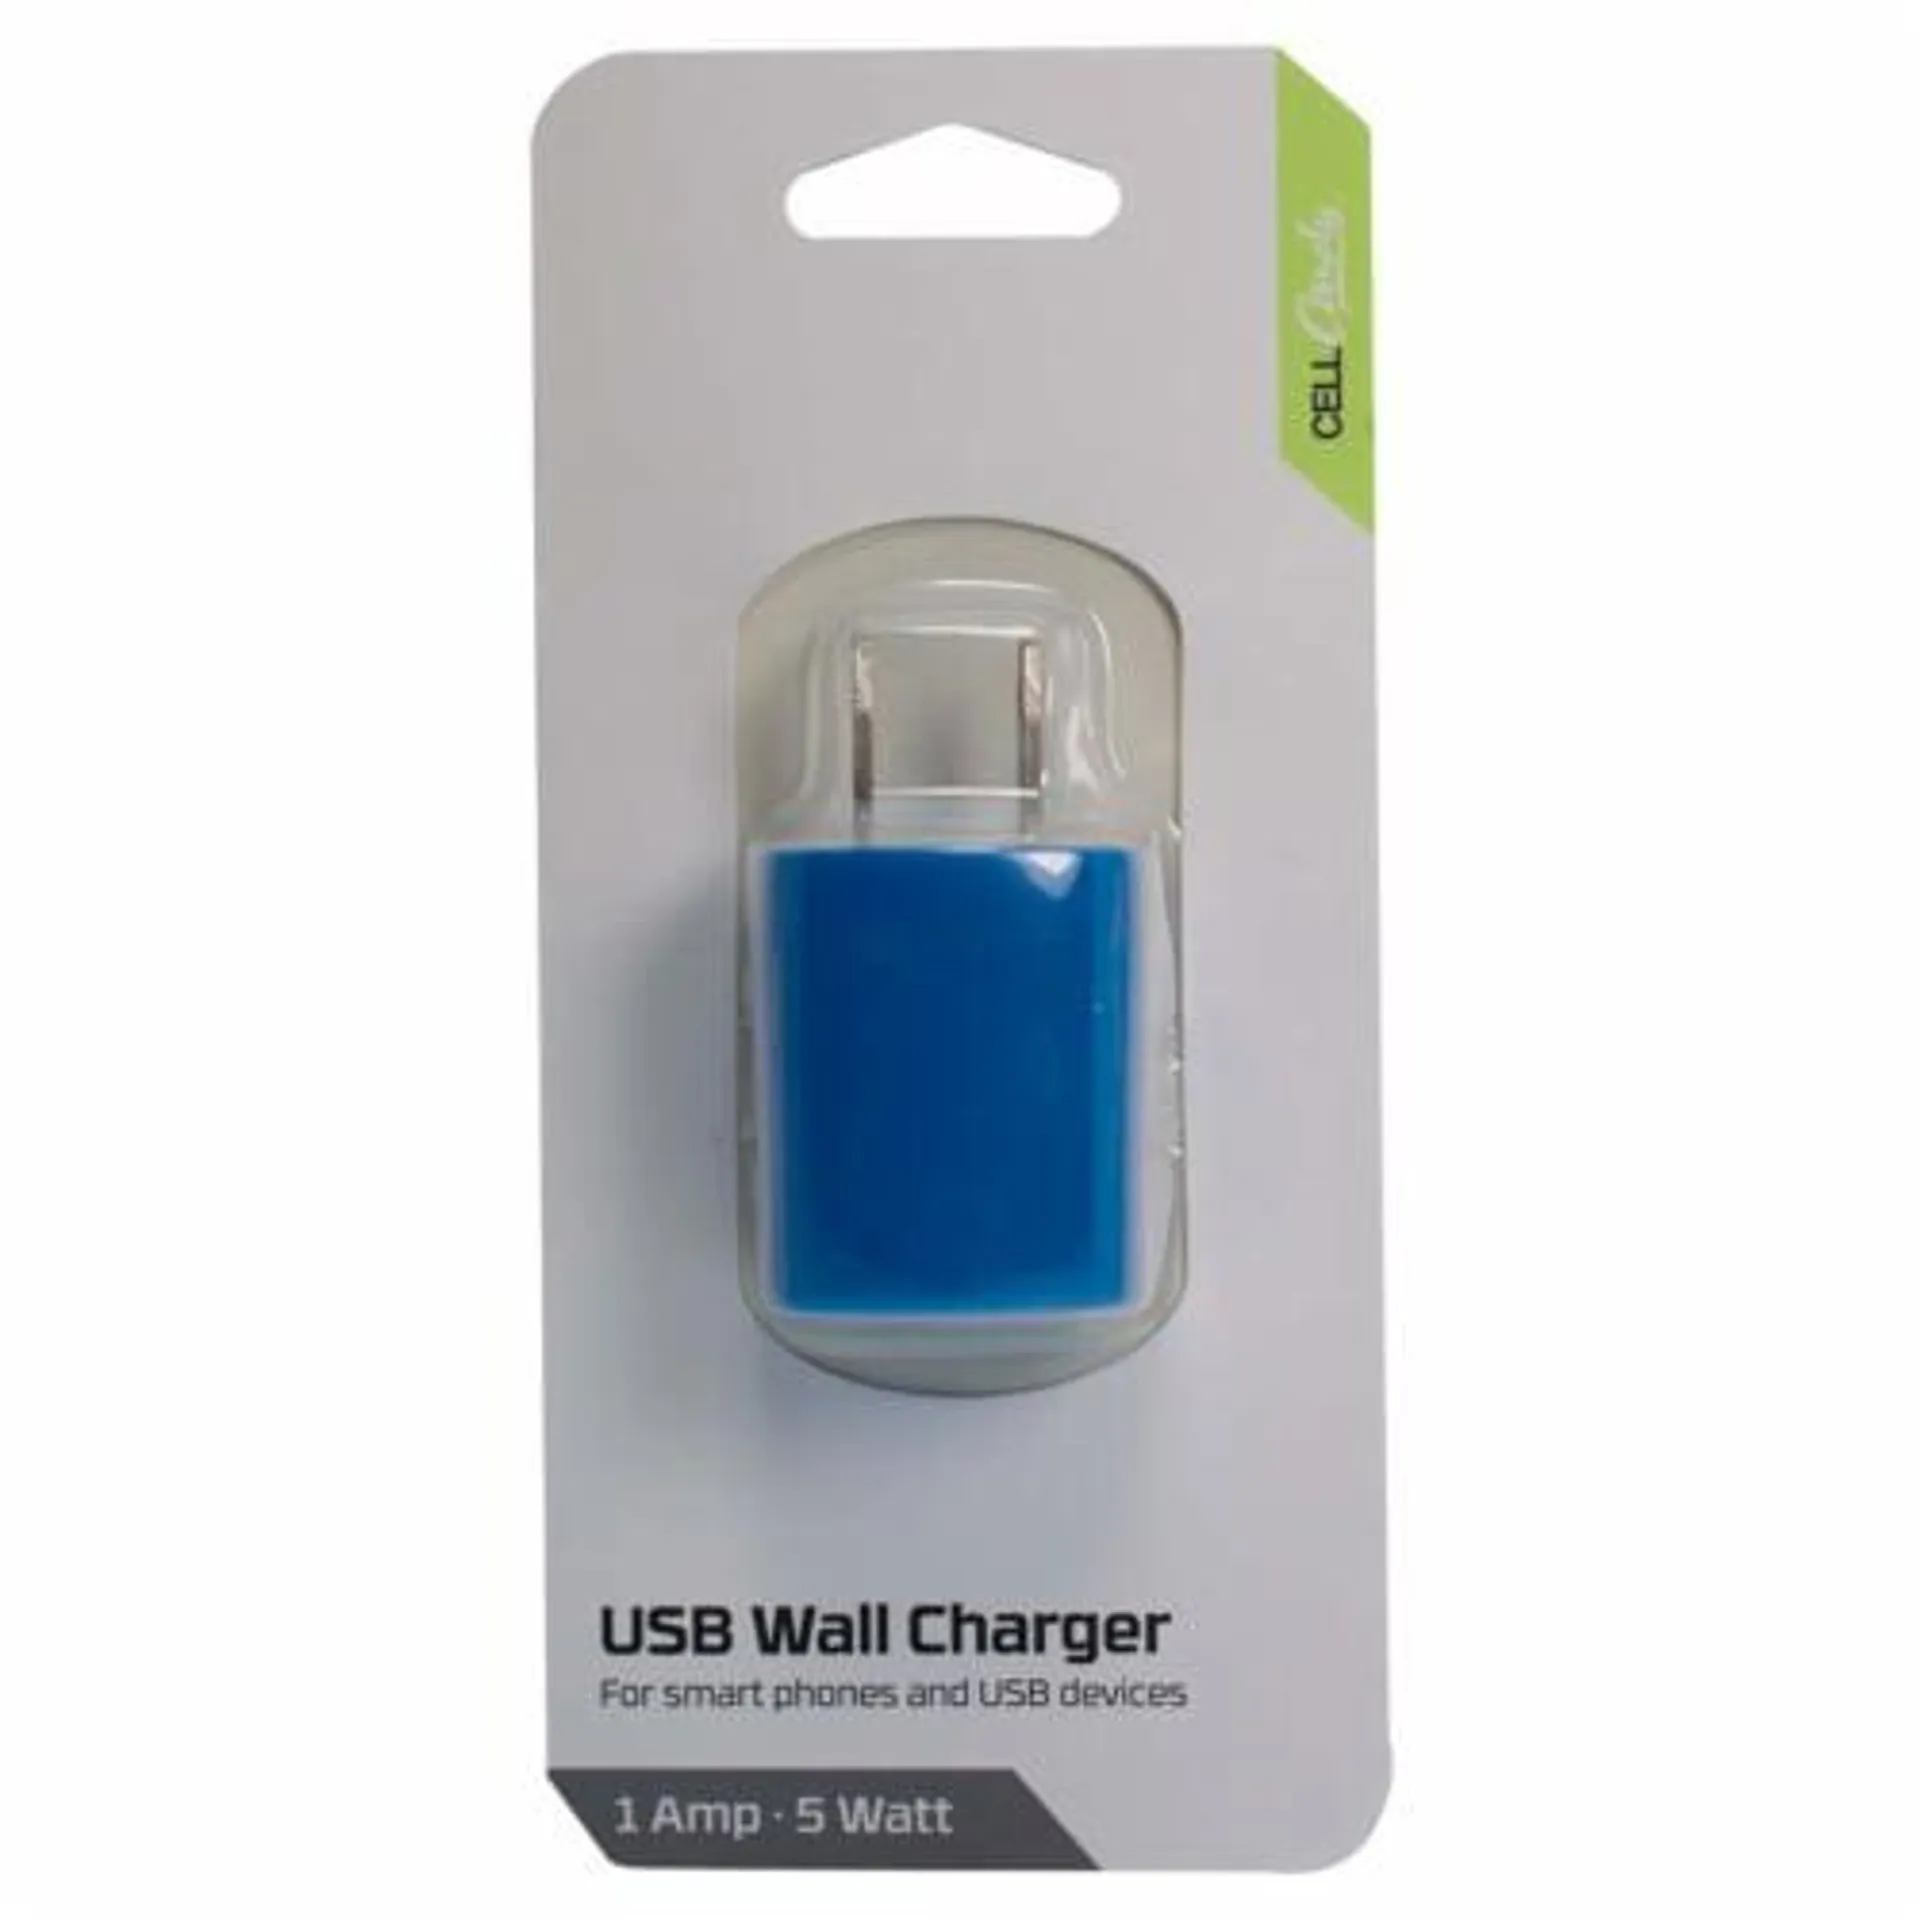 CELLCandy USB Wall Charger - Tropical Blue